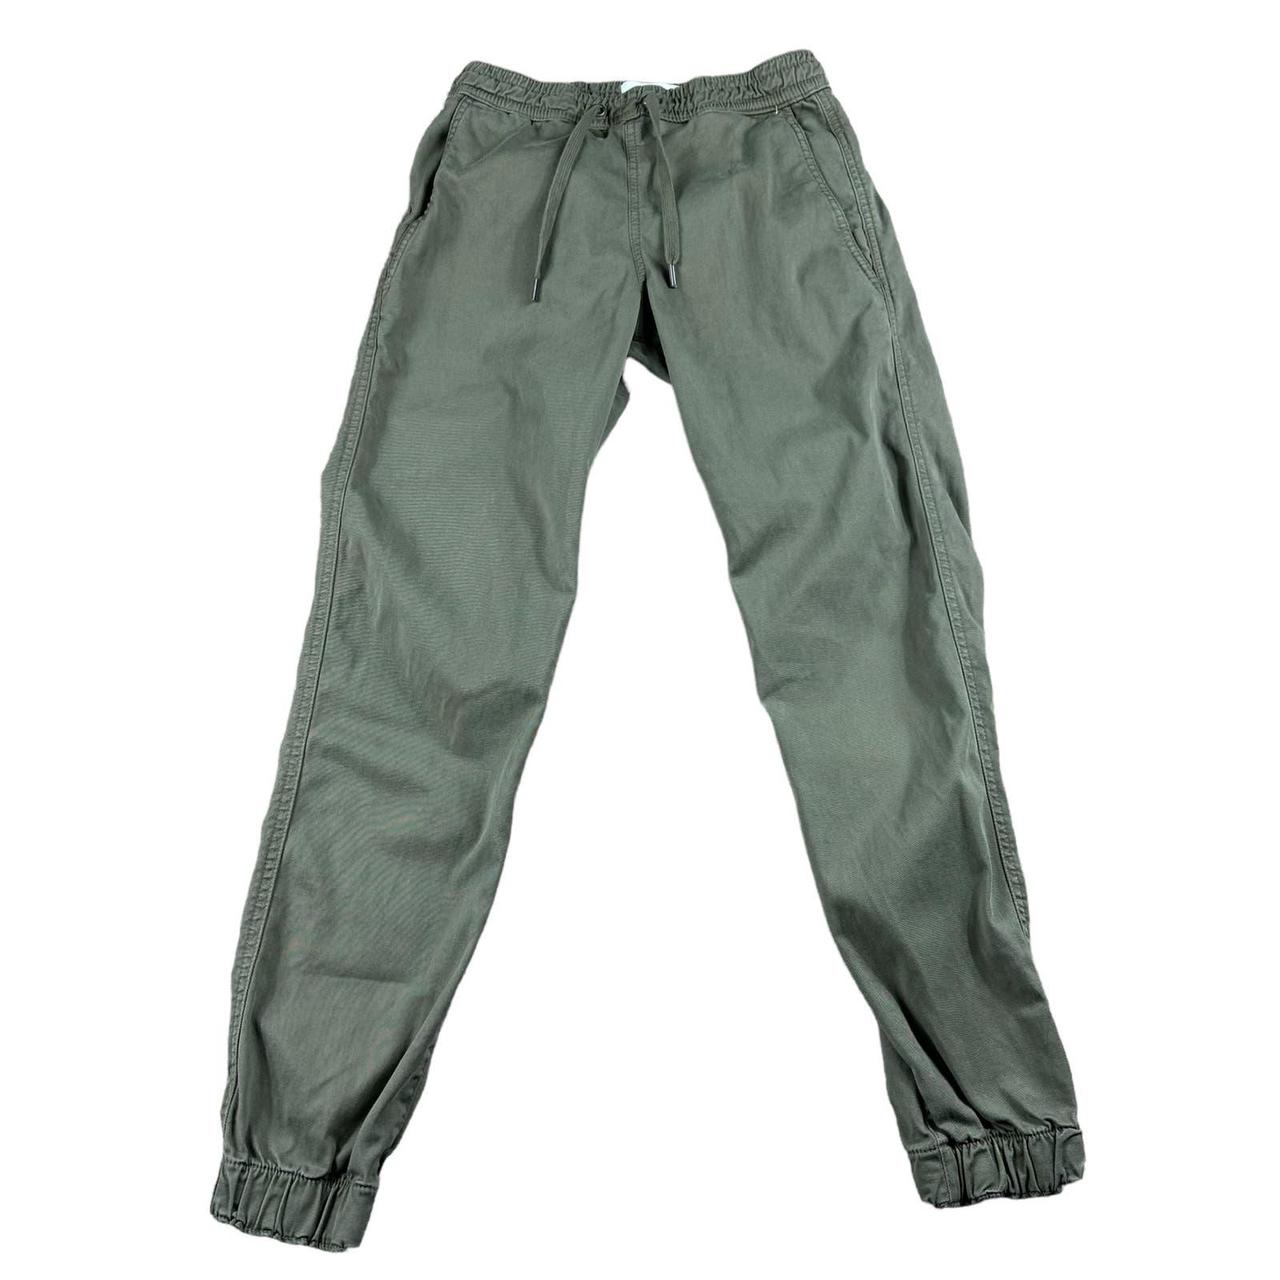 Olive Green Joggers - Buy Olive Green Joggers online in India